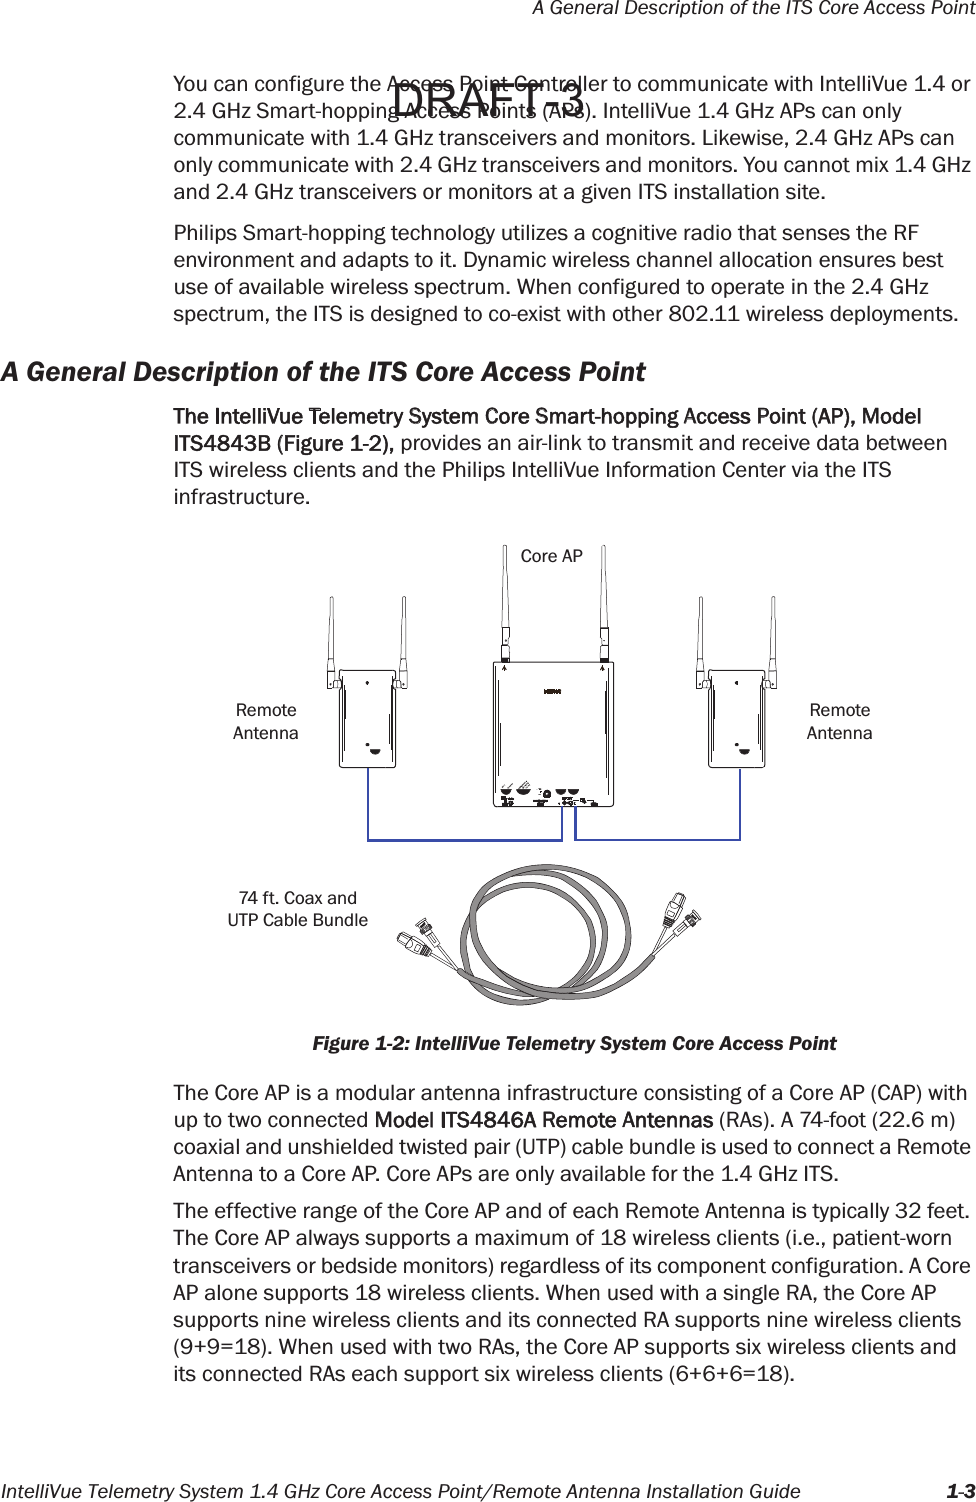 A General Description of the ITS Core Access PointIntelliVue Telemetry System 1.4 GHz Core Access Point/Remote Antenna Installation Guide 1-3You can configure the Access Point Controller to communicate with IntelliVue 1.4 or 2.4 GHz Smart-hopping Access Points (APs). IntelliVue 1.4 GHz APs can only communicate with 1.4 GHz transceivers and monitors. Likewise, 2.4 GHz APs can only communicate with 2.4 GHz transceivers and monitors. You cannot mix 1.4 GHz and 2.4 GHz transceivers or monitors at a given ITS installation site.Philips Smart-hopping technology utilizes a cognitive radio that senses the RF environment and adapts to it. Dynamic wireless channel allocation ensures best use of available wireless spectrum. When configured to operate in the 2.4 GHz spectrum, the ITS is designed to co-exist with other 802.11 wireless deployments.A General Description of the ITS Core Access PointThe IntelliVue Telemetry System Core Smart-hopping Access Point (AP), Model ITS4843B (Figure 1-2), provides an air-link to transmit and receive data between ITS wireless clients and the Philips IntelliVue Information Center via the ITS infrastructure.The Core AP is a modular antenna infrastructure consisting of a Core AP (CAP) with up to two connected Model ITS4846A Remote Antennas (RAs). A 74-foot (22.6 m) coaxial and unshielded twisted pair (UTP) cable bundle is used to connect a Remote Antenna to a Core AP. Core APs are only available for the 1.4 GHz ITS.The effective range of the Core AP and of each Remote Antenna is typically 32 feet. The Core AP always supports a maximum of 18 wireless clients (i.e., patient-worn transceivers or bedside monitors) regardless of its component configuration. A Core AP alone supports 18 wireless clients. When used with a single RA, the Core AP supports nine wireless clients and its connected RA supports nine wireless clients (9+9=18). When used with two RAs, the Core AP supports six wireless clients and its connected RAs each support six wireless clients (6+6+6=18).Figure 1-2: IntelliVue Telemetry System Core Access PointCore APRemoteAntennaRemoteAntenna74 ft. Coax andUTP Cable BundleDRAFT-3